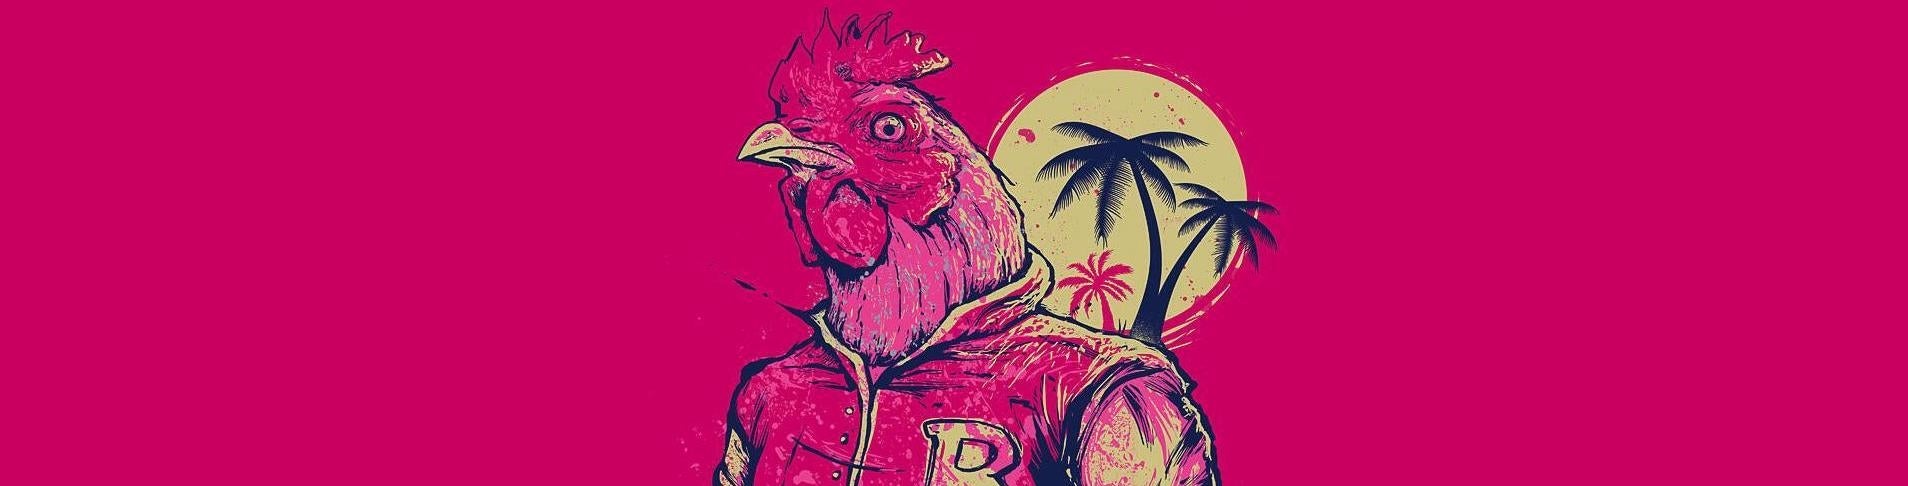 Image for Watch: Chris plays Hotline Miami for the first time, gets quite into violence